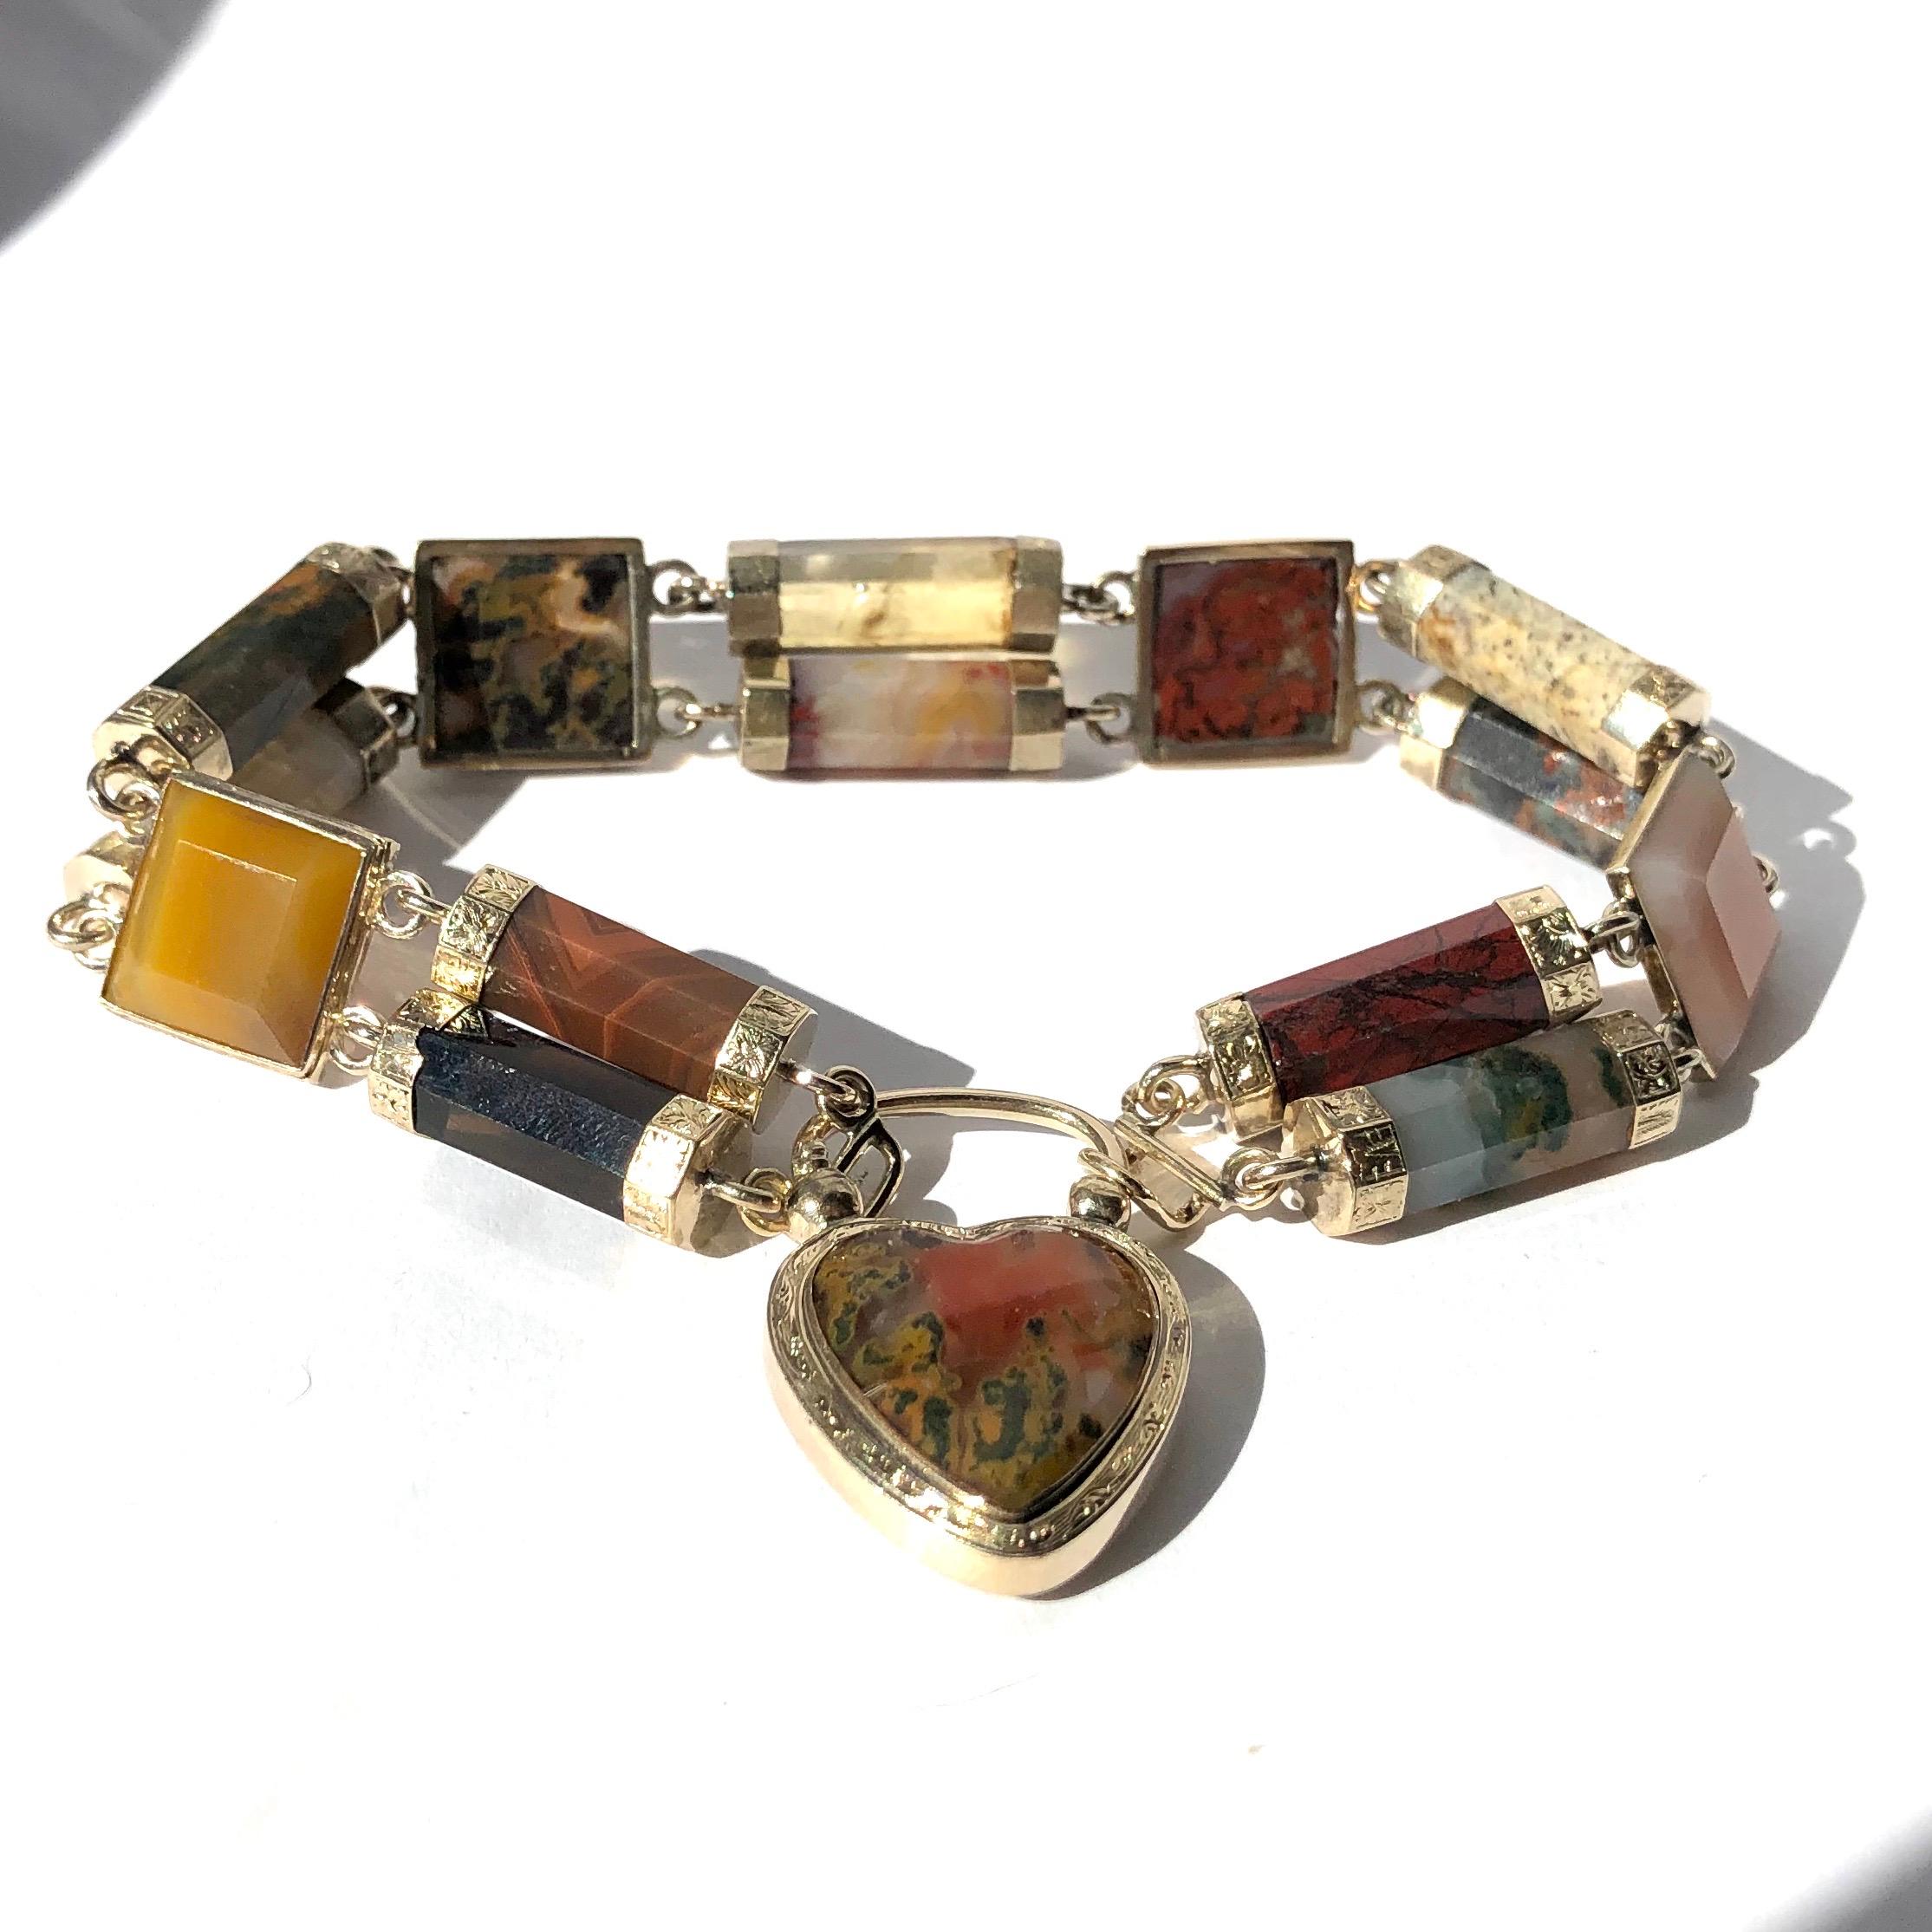 This gorgeous bracelet holds so much colour. The settings are both simple and dome have fine engraving. The bracelet is fastened using a heart locket with a glazed back. 

Length: 21.2cm
Width: 15mm
Locket Dimensions: 32x20mm 

Weight: 36.8g 